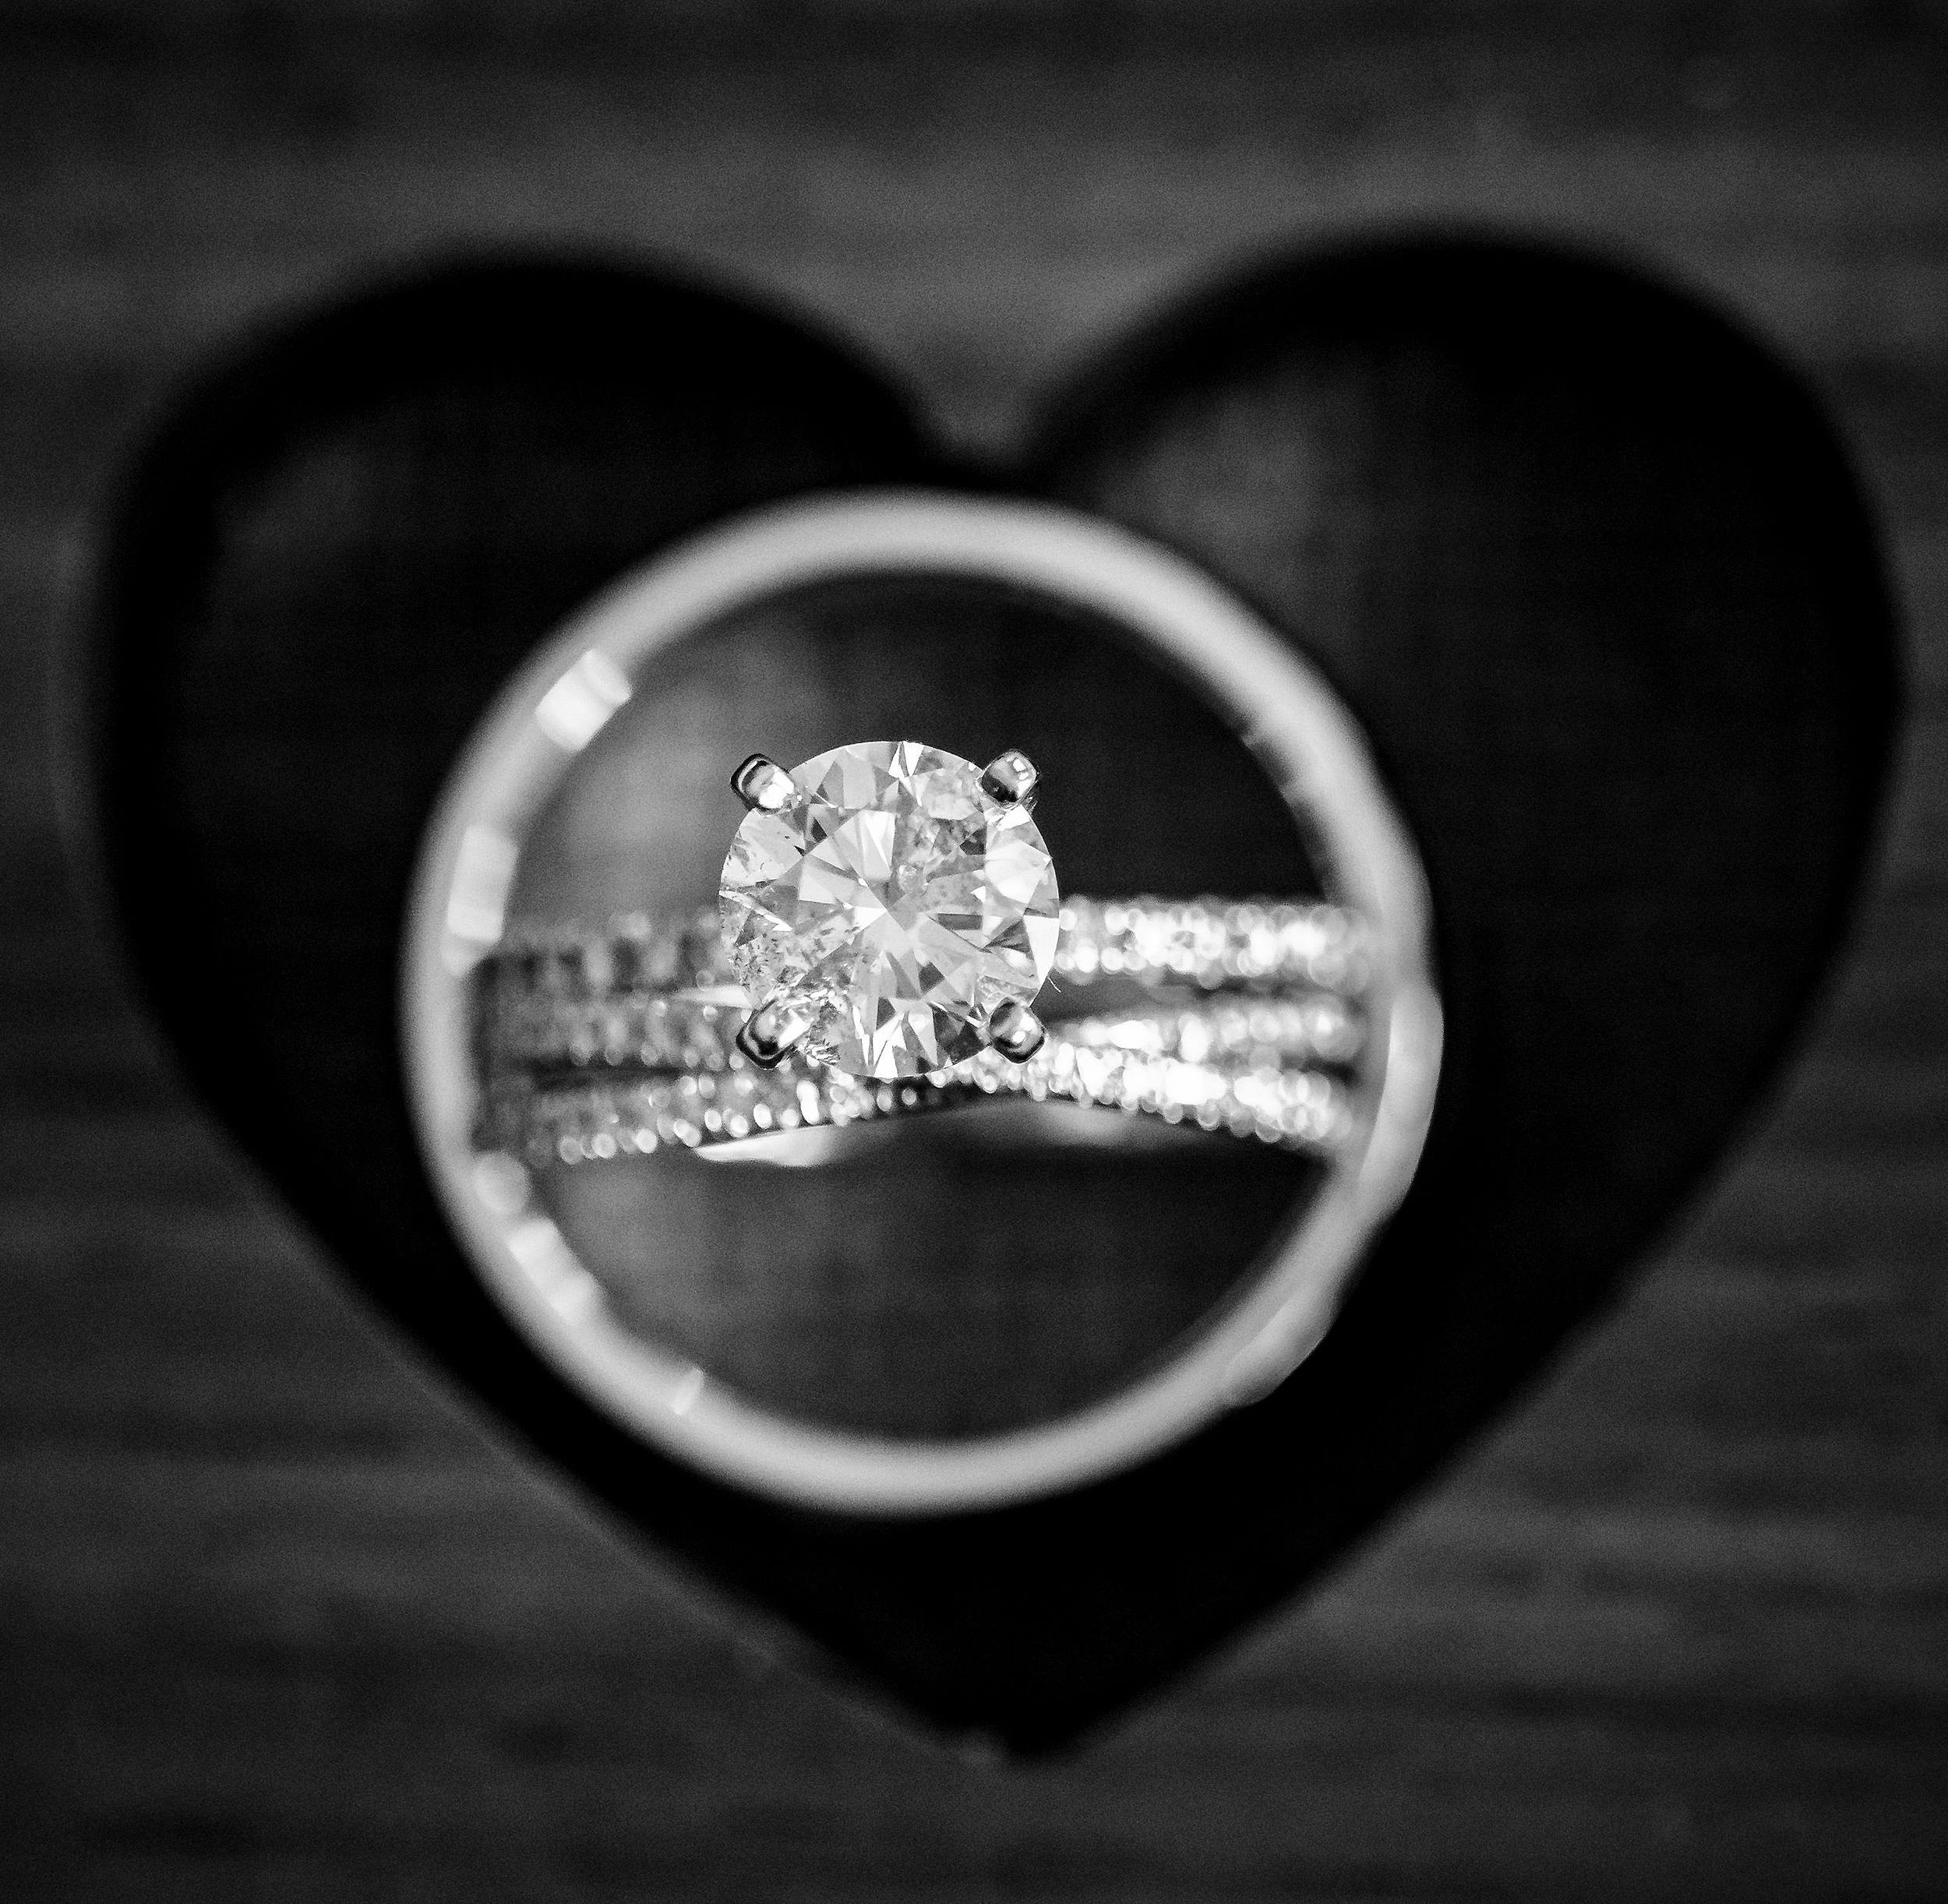 Details of wedding rings sitting on a heart